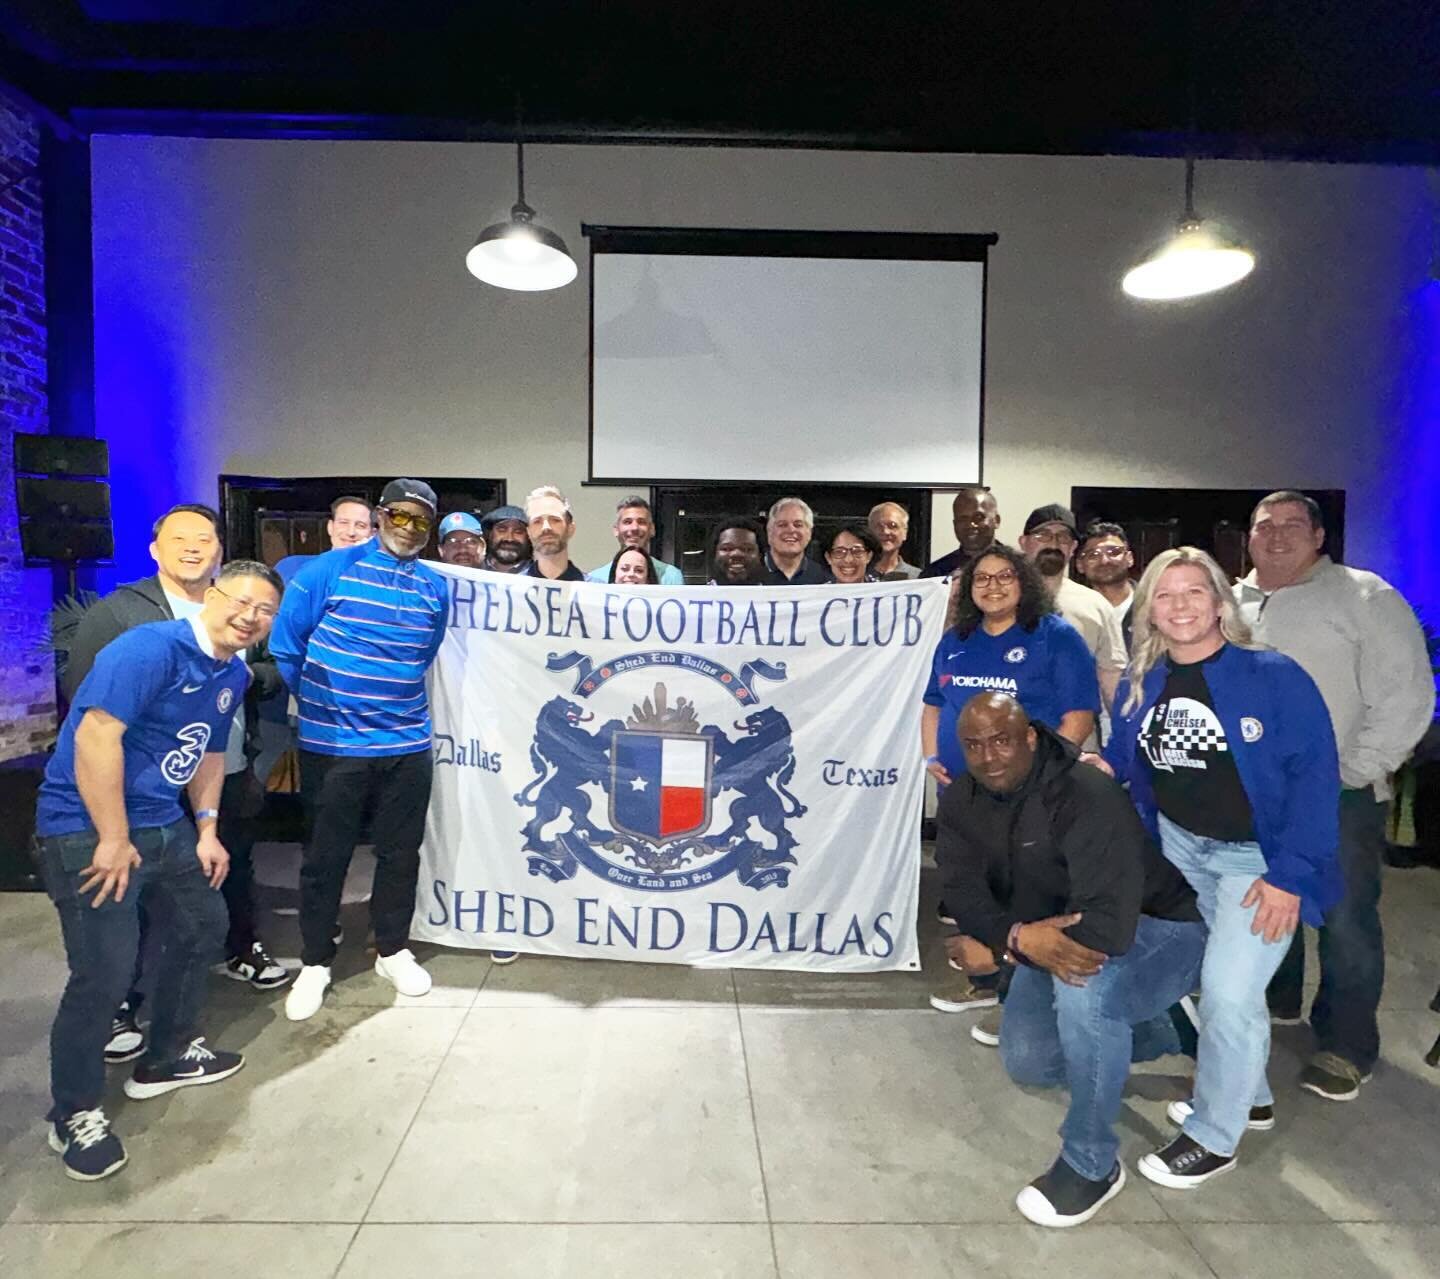 Good evening with @thecannersway at @hermanmarshall whiskey tonight!  Thanks for the hospitality Herman Marshall. #lfg
&bull;
&bull;
&bull;
&bull;
#chelsea #chelseafc #westlondon #londonisblue #sw6 #utc #pregame #pints #shedenddallas #americanswblues